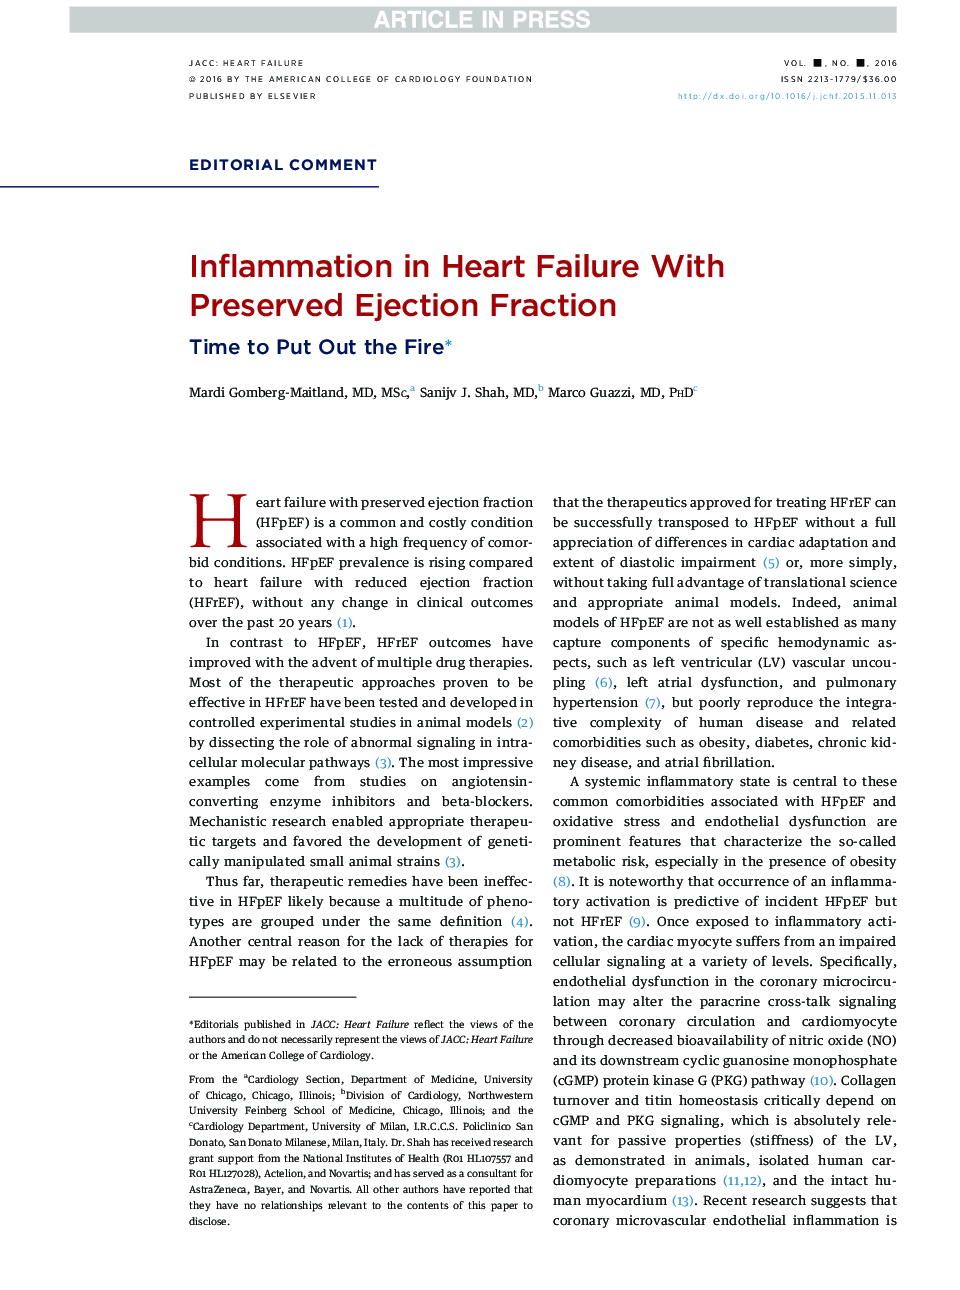 Inflammation in Heart Failure With Preserved Ejection Fraction